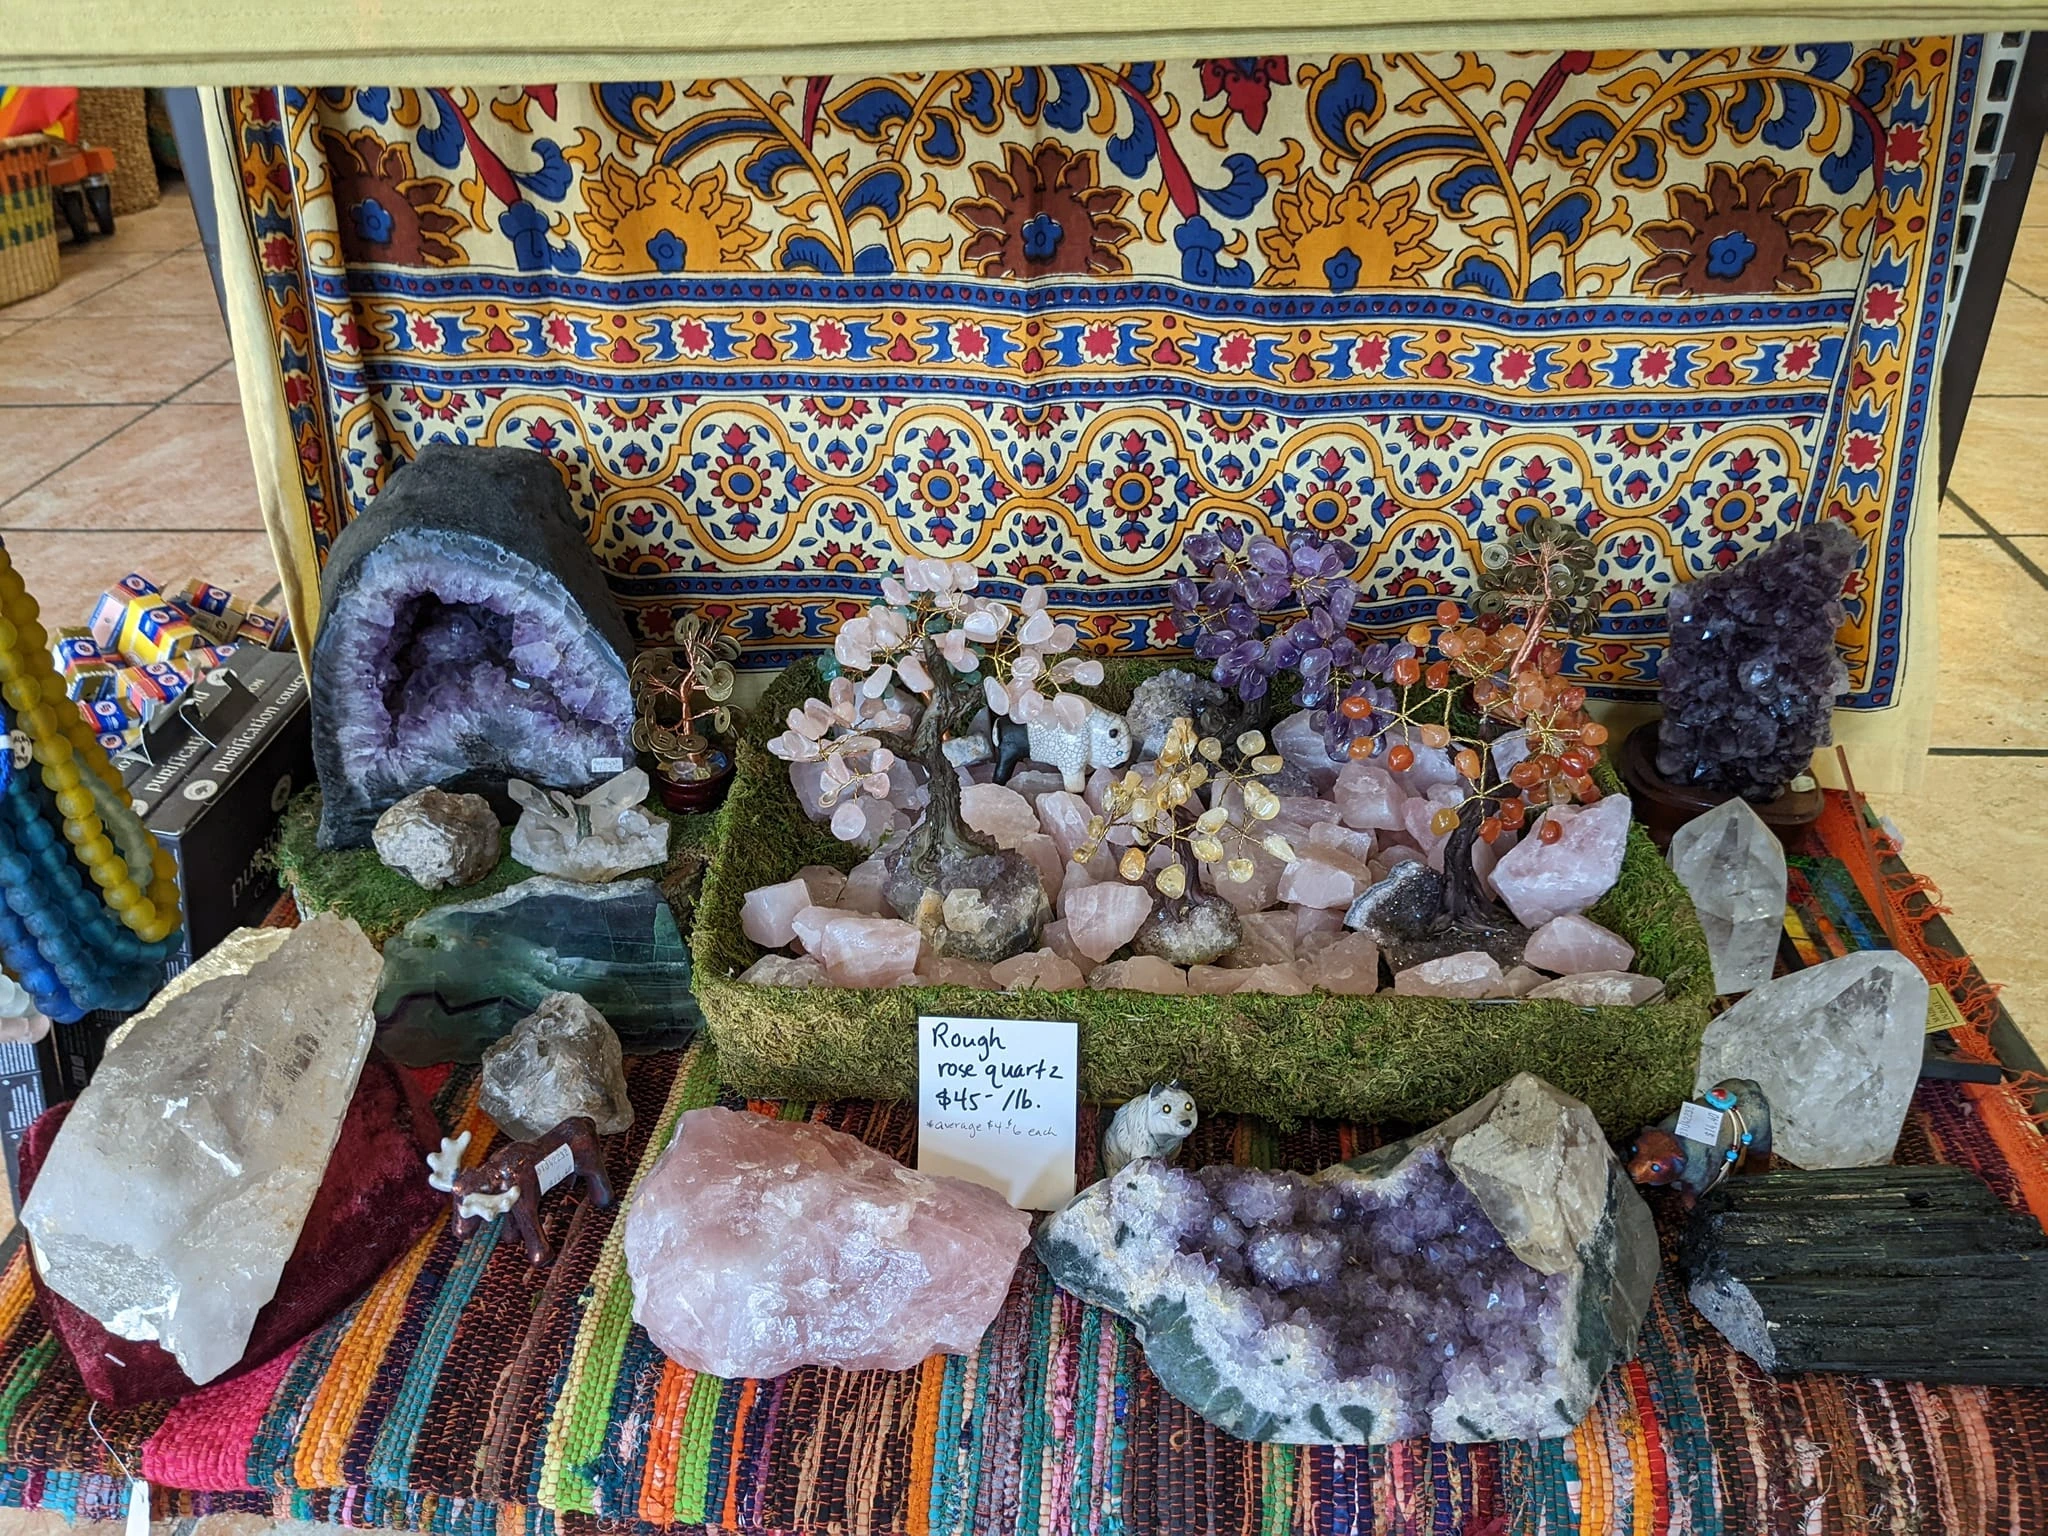 A display of crystals and gemstones